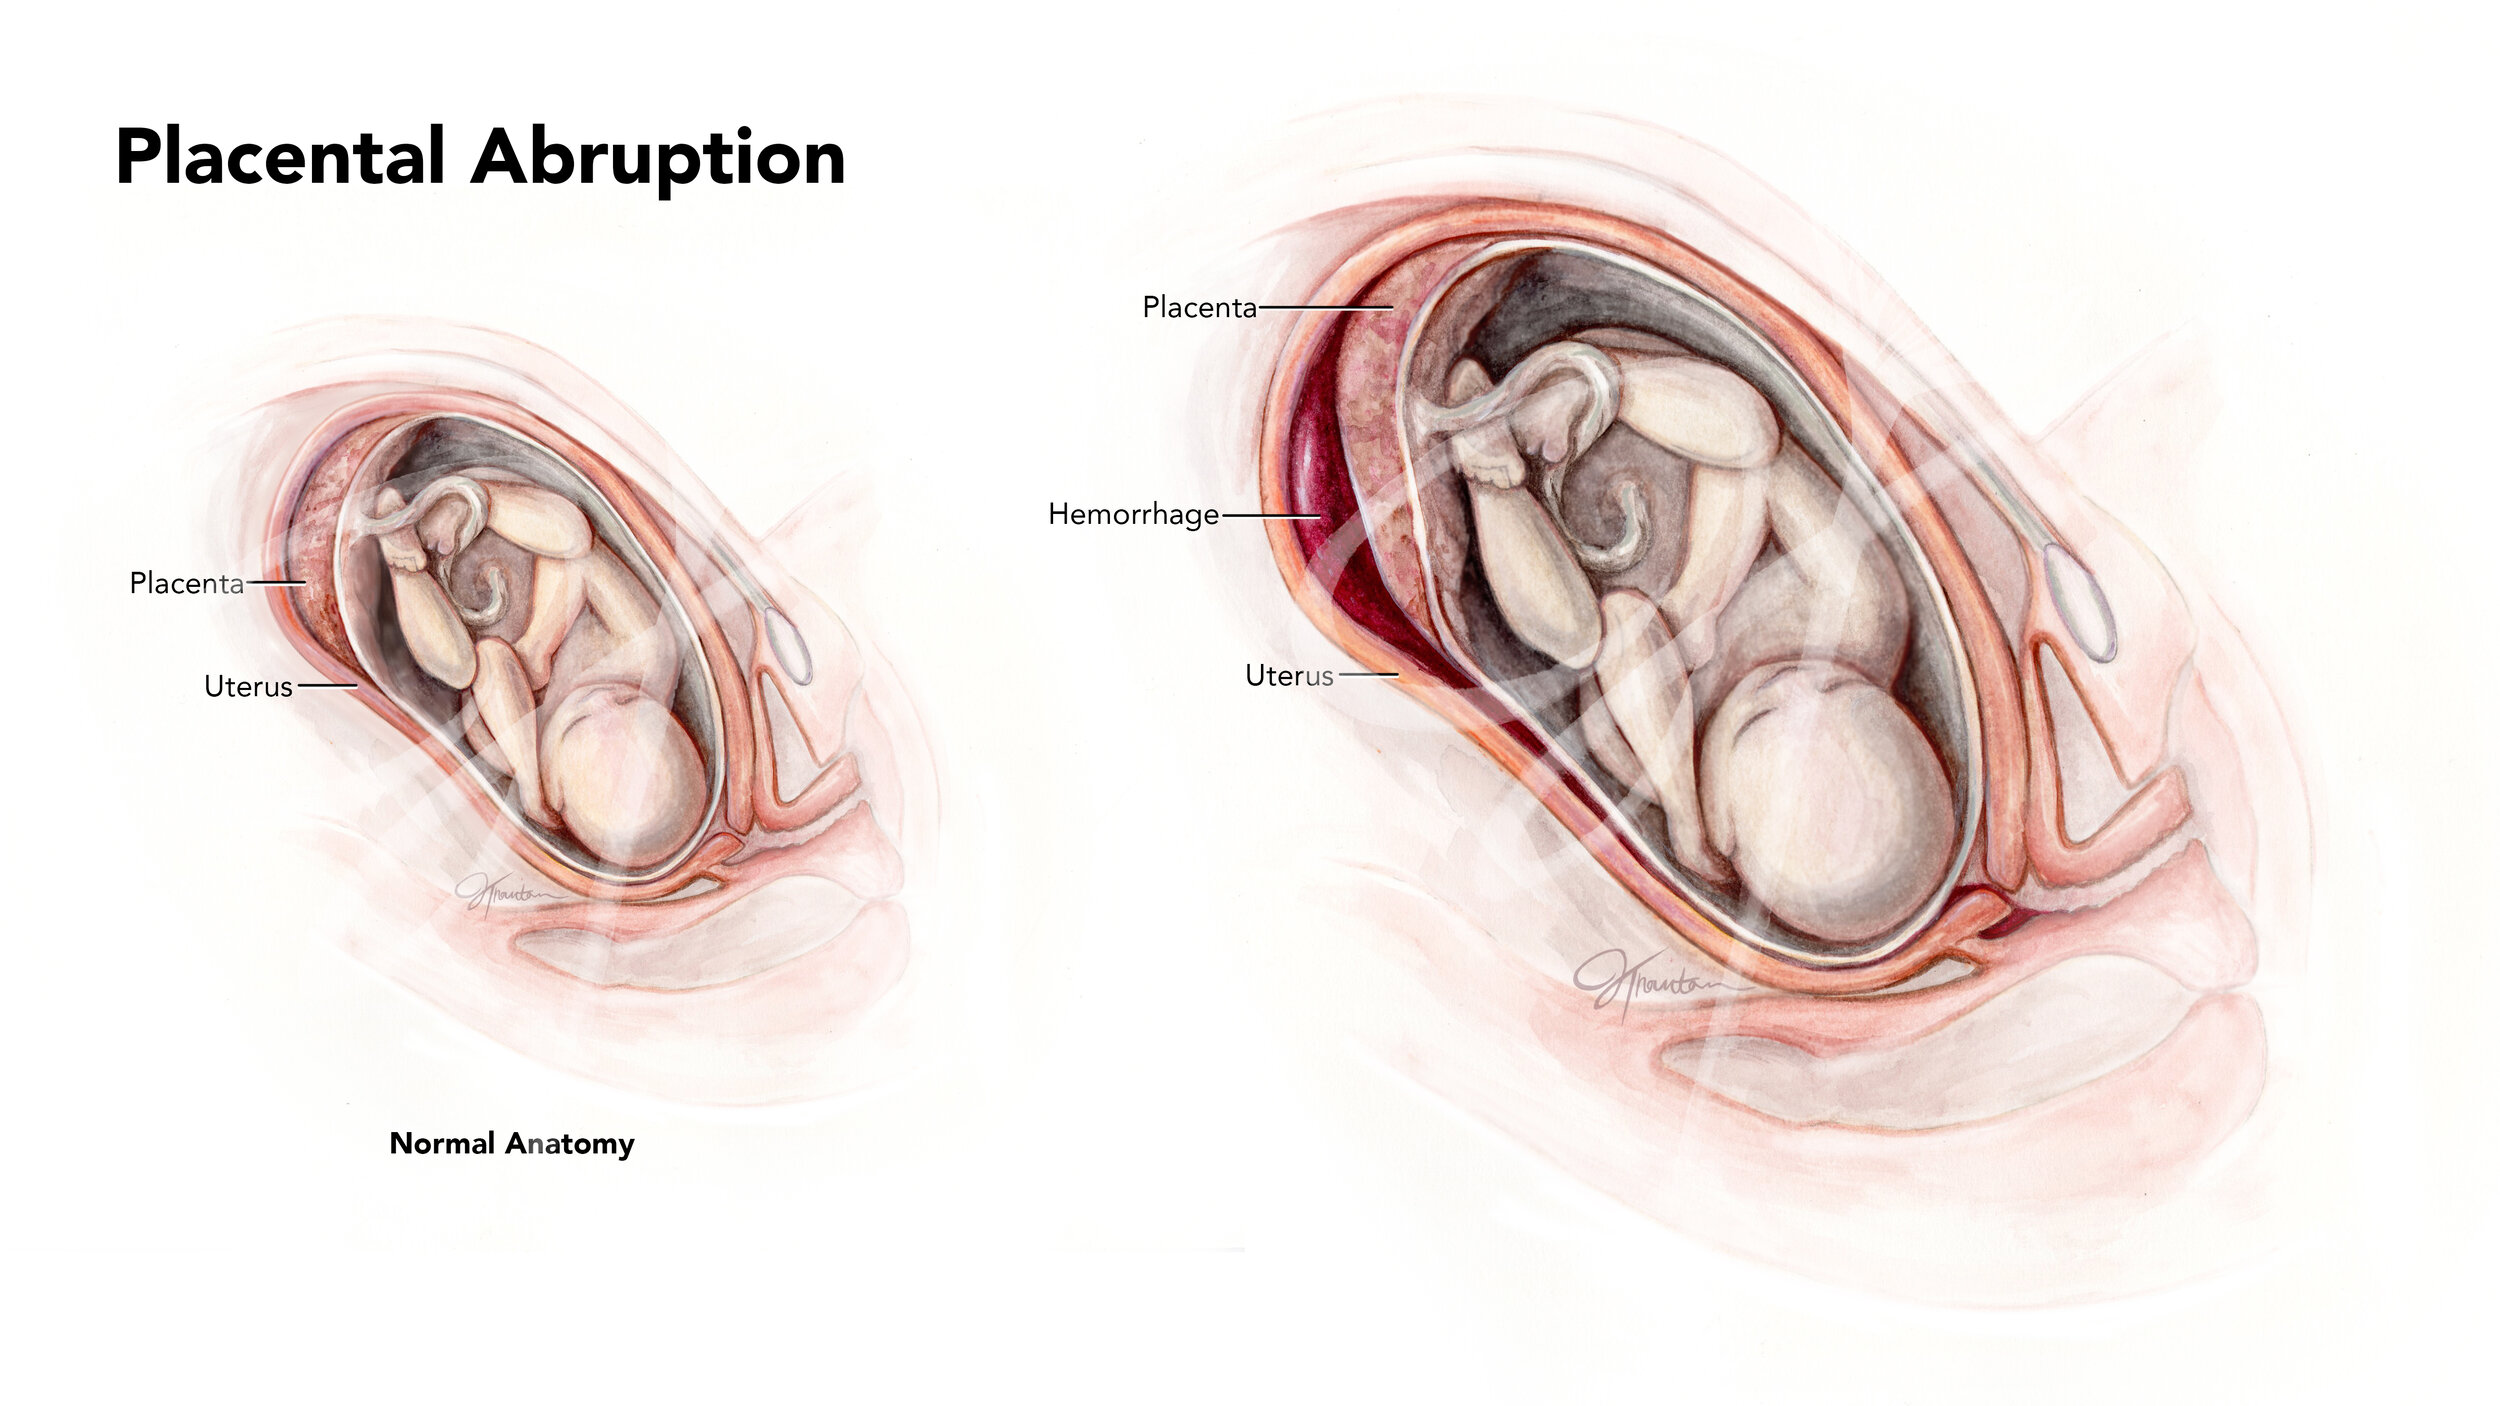   Medium:  Watercolor, Photoshop   Objective:  To illustrate to an audience of medical students the pathology of placental abruption. 